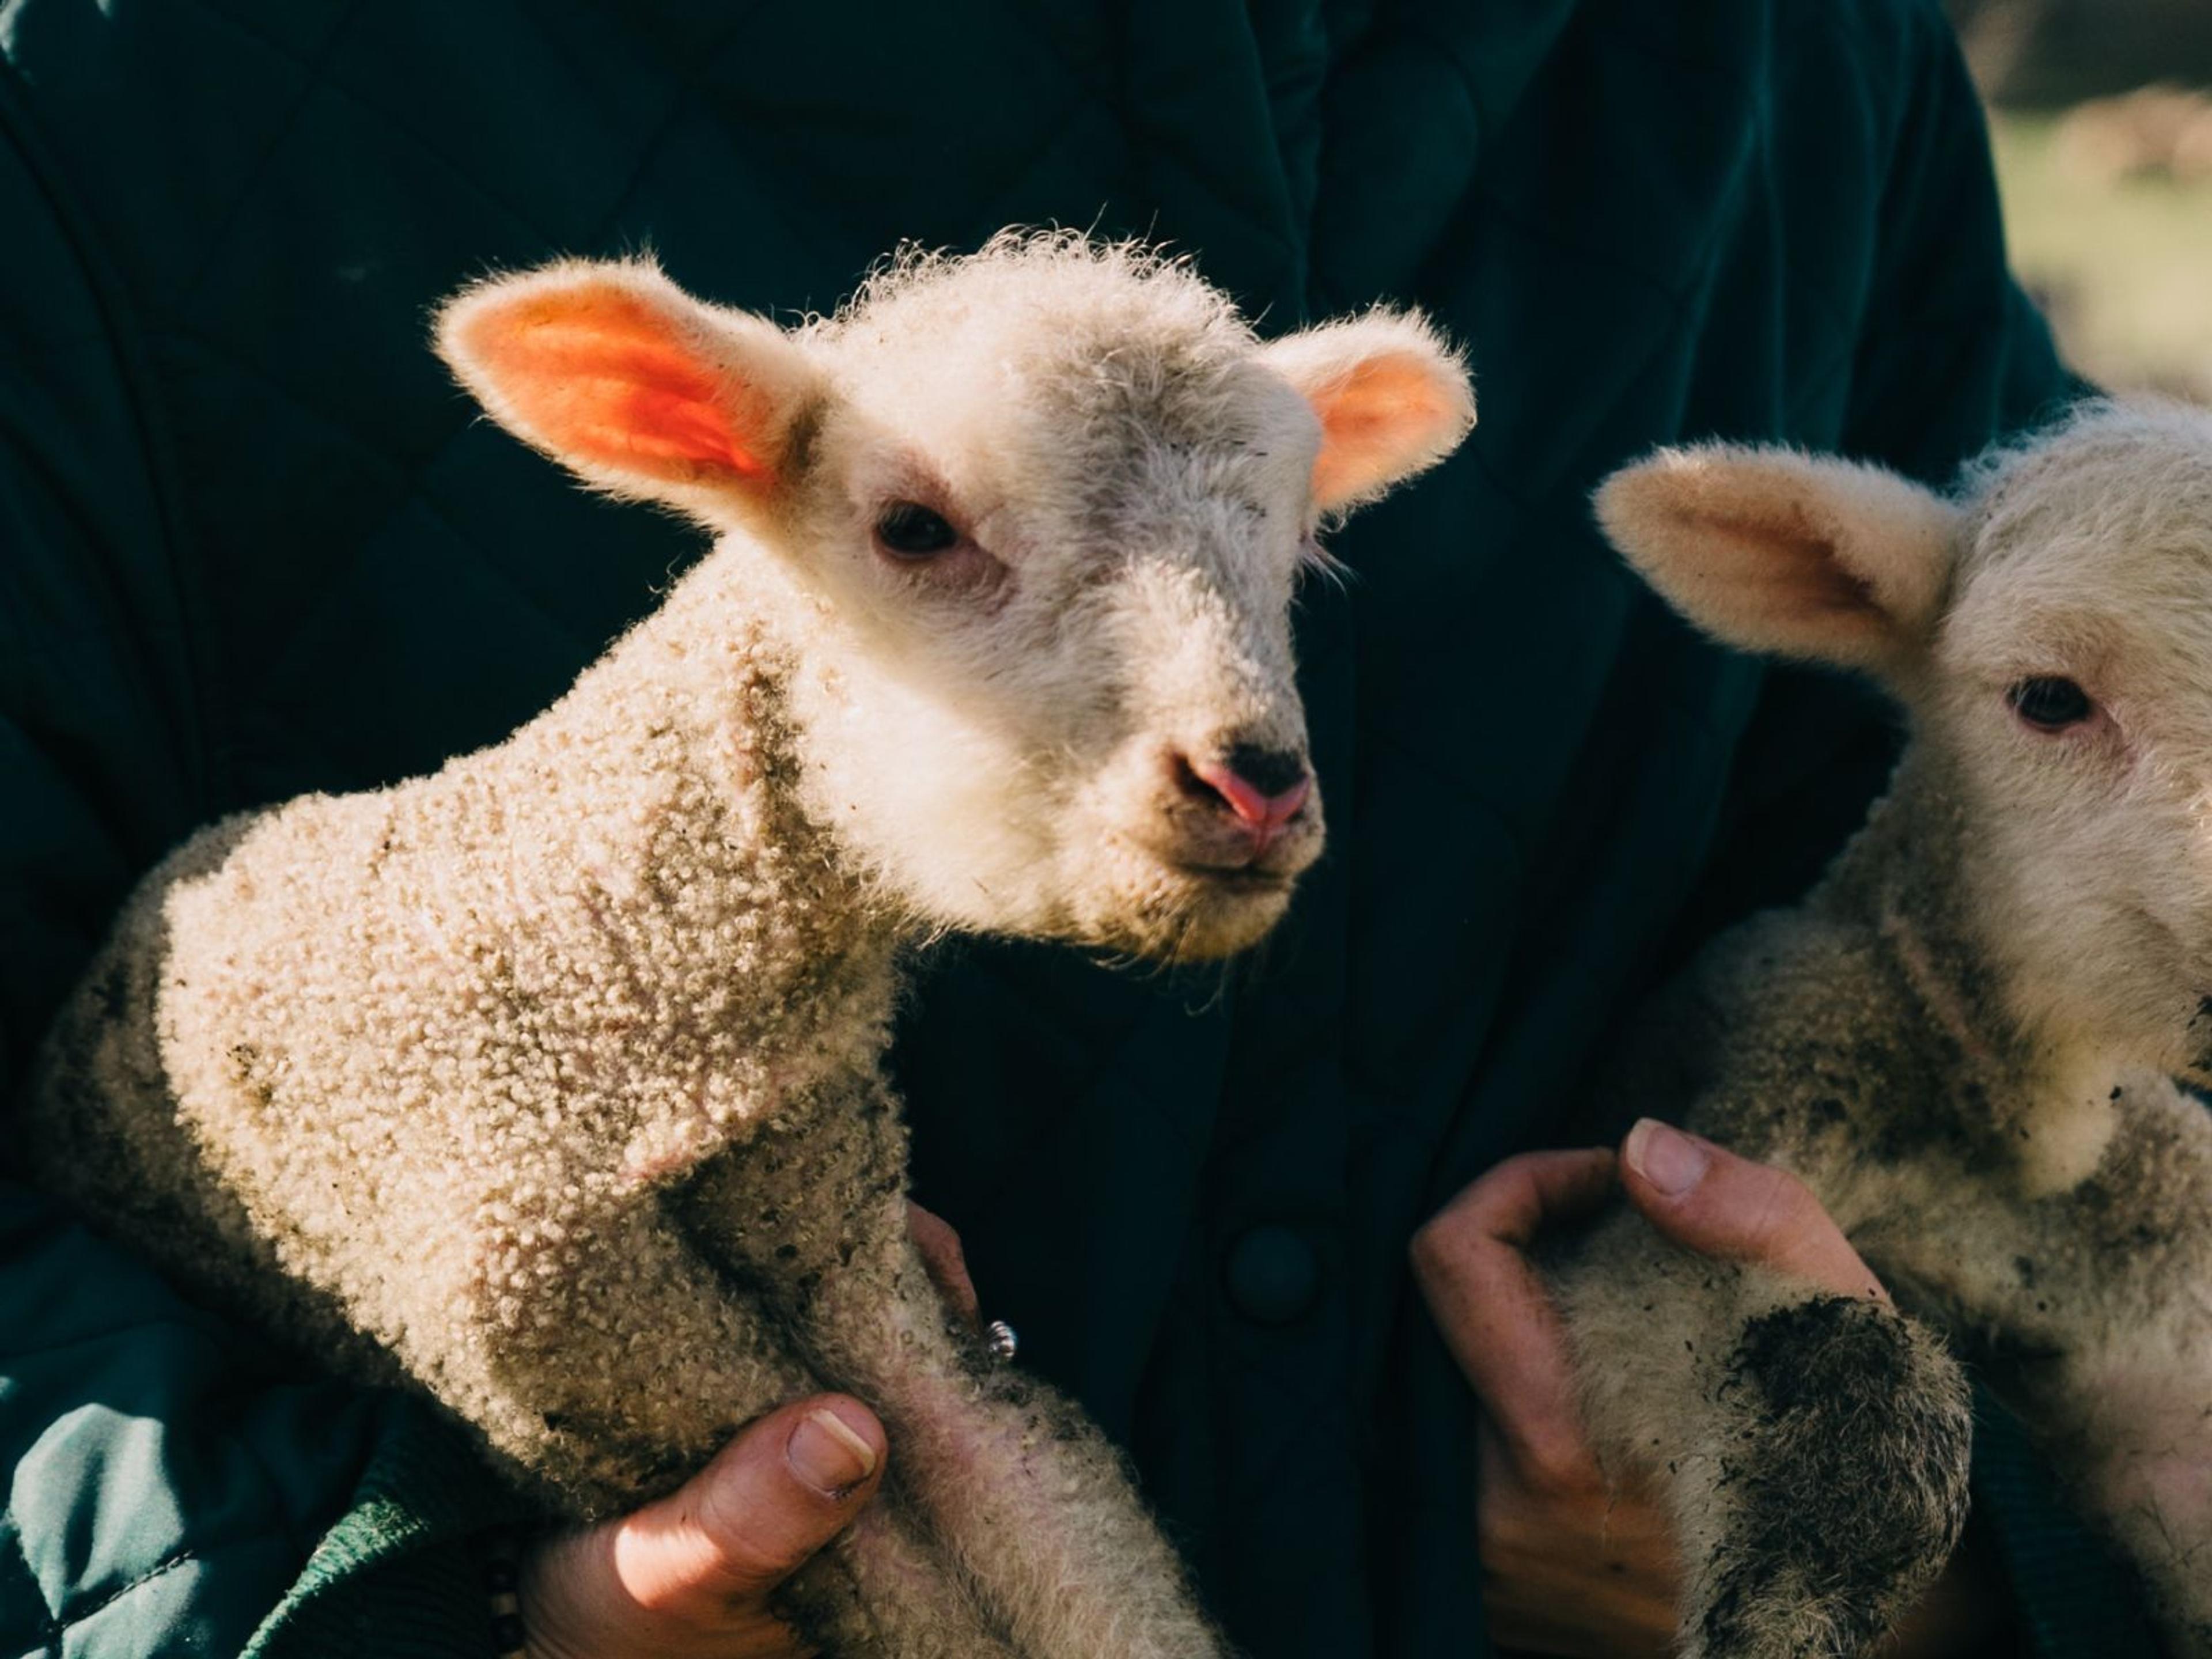 Two lambs being held by a person.